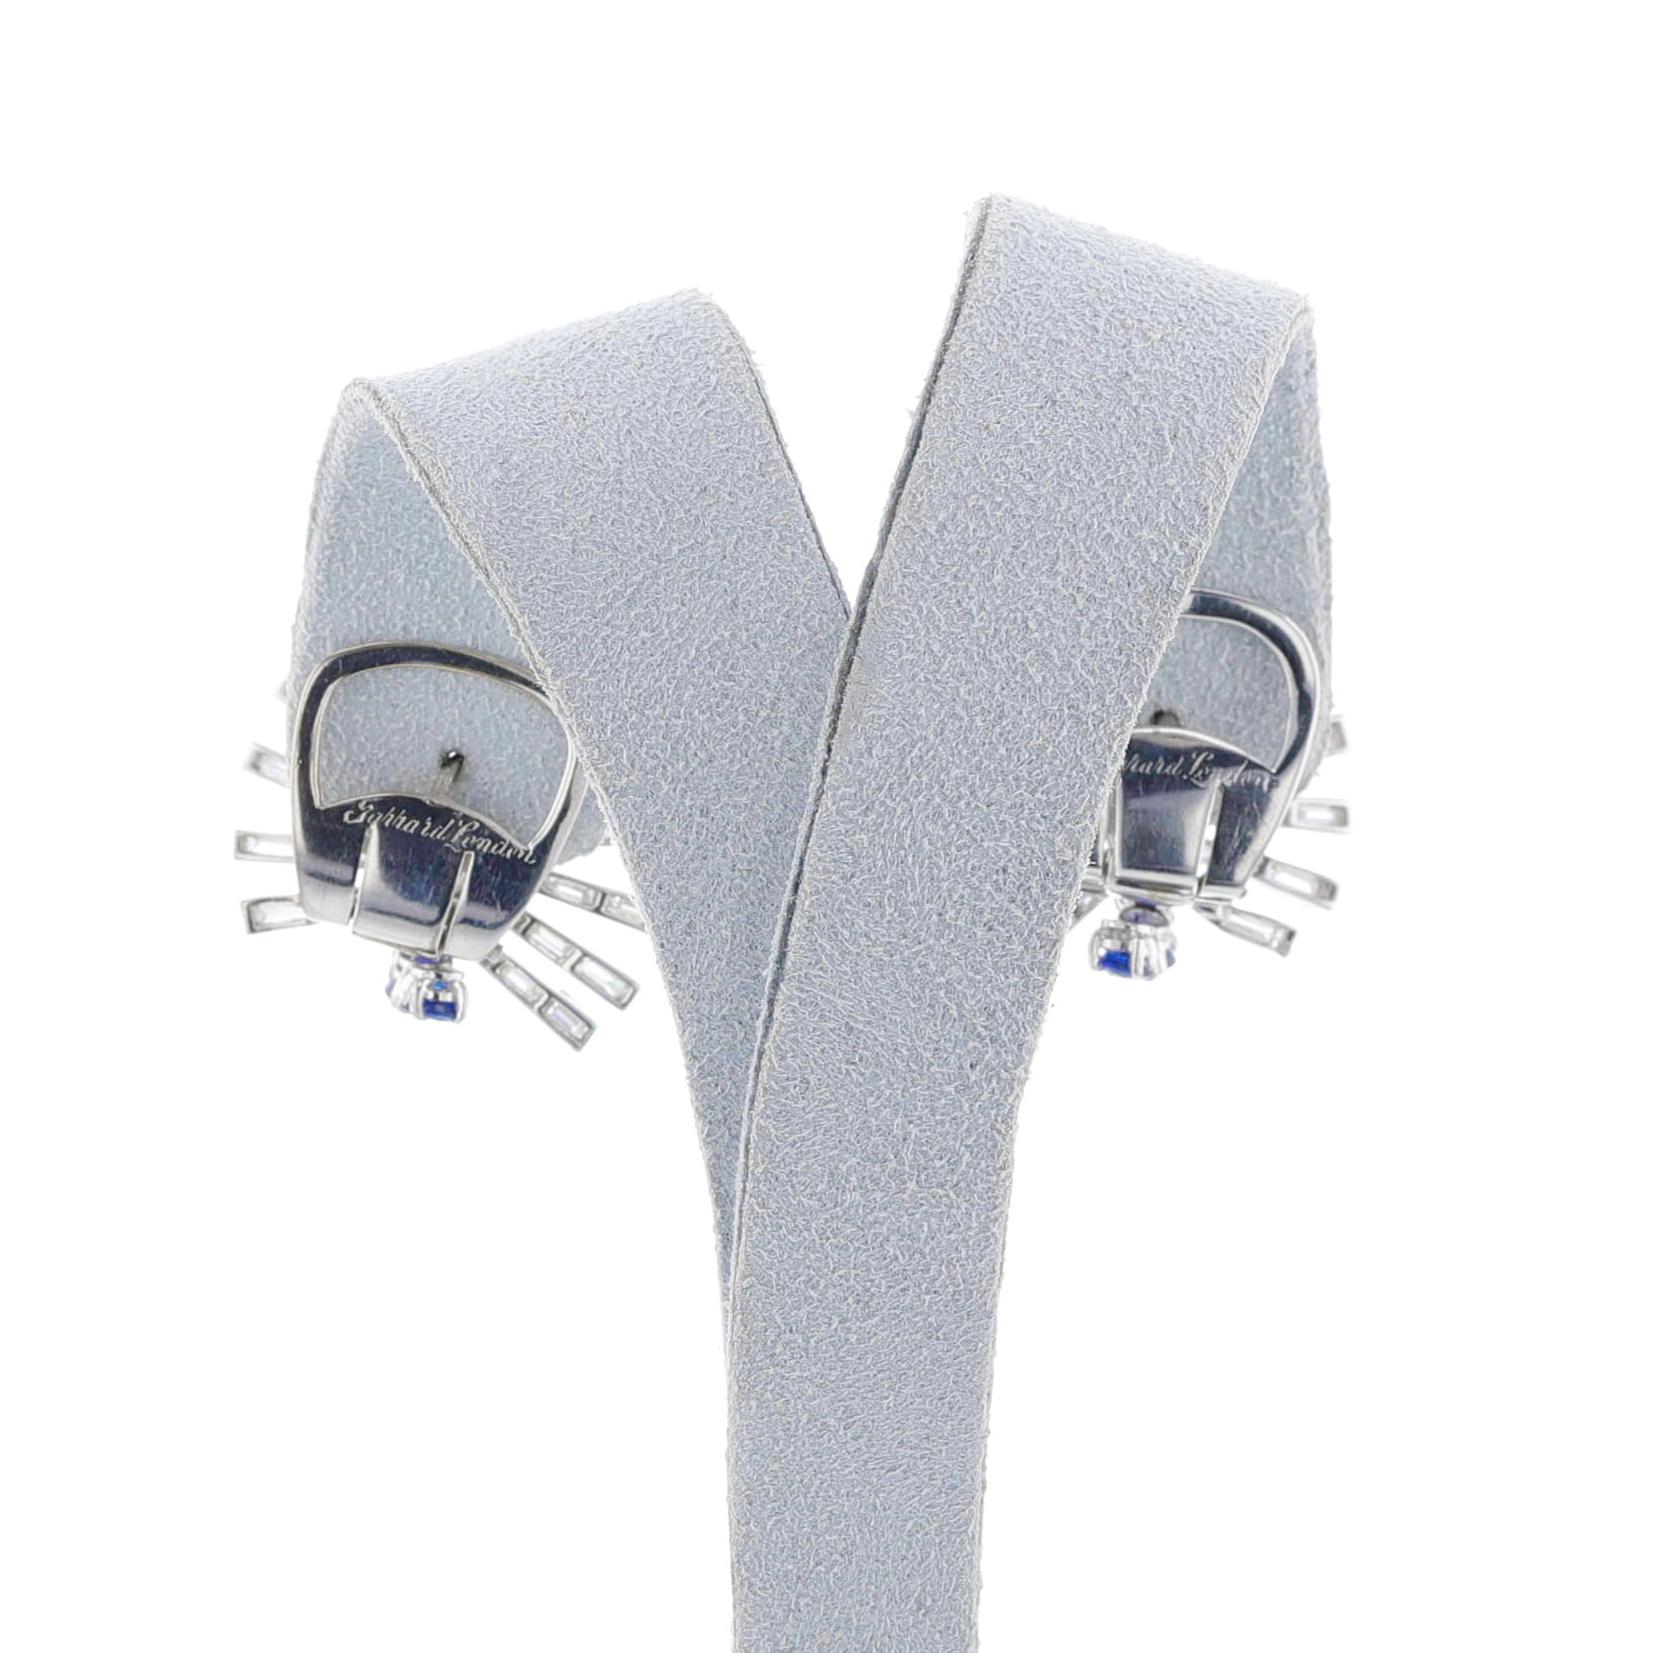 Crafted in 18K white gold, these stunning earrings from Garrard feature a unique design with sapphire and diamond stones, weighing in at 15.60 grams. Perfect for any special occasion, these beautiful earrings add a hint of elegance and